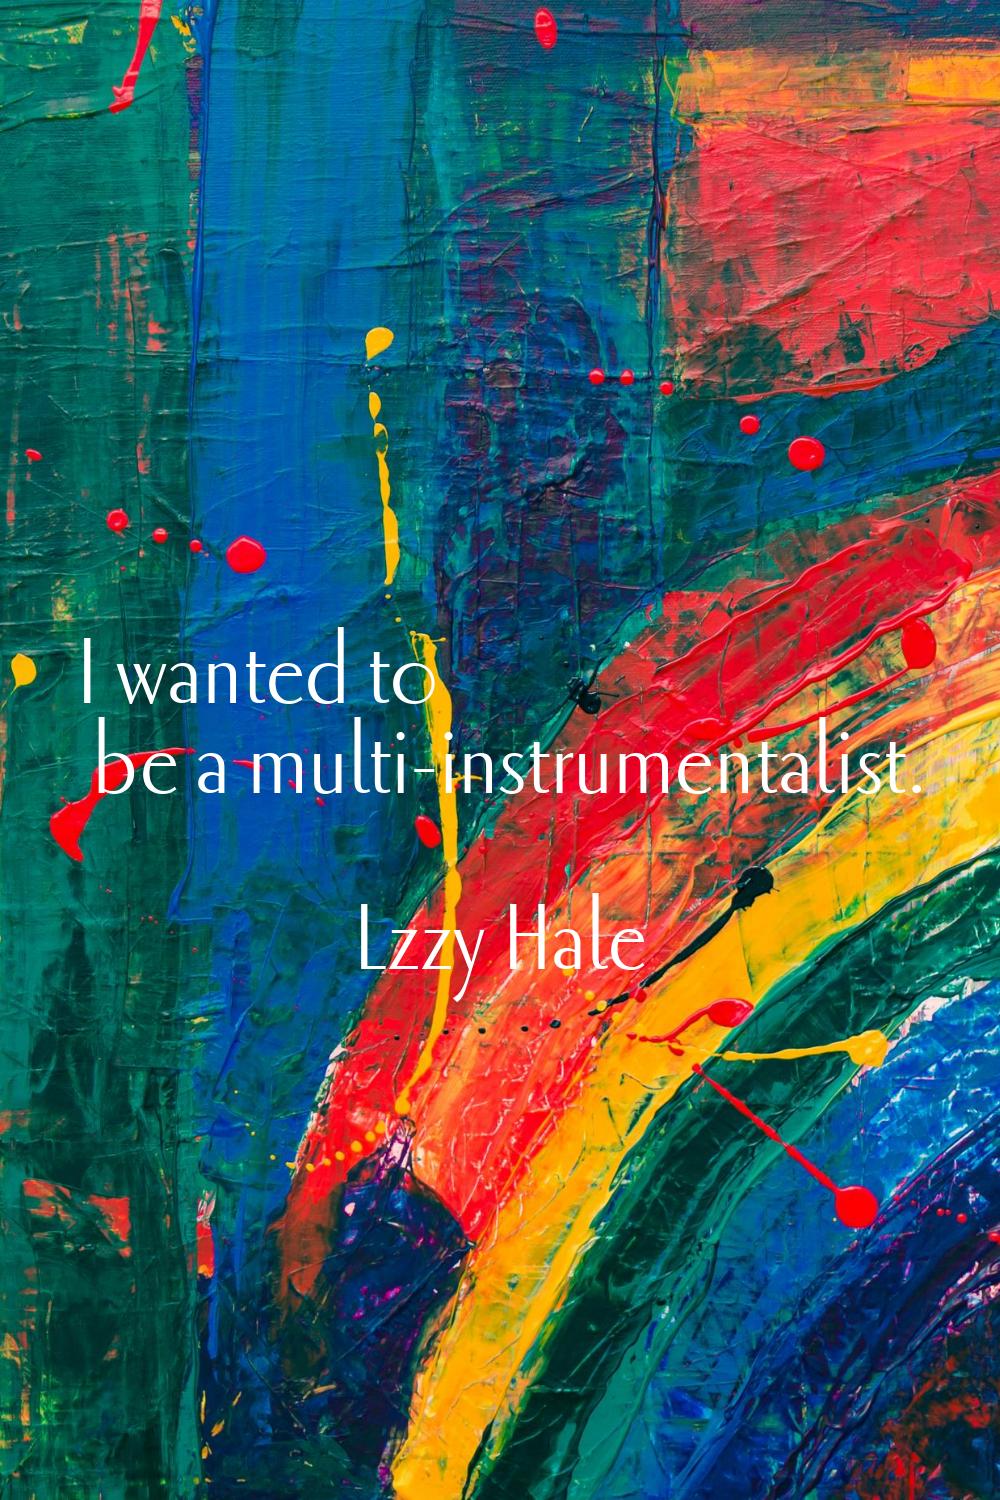 I wanted to be a multi-instrumentalist.